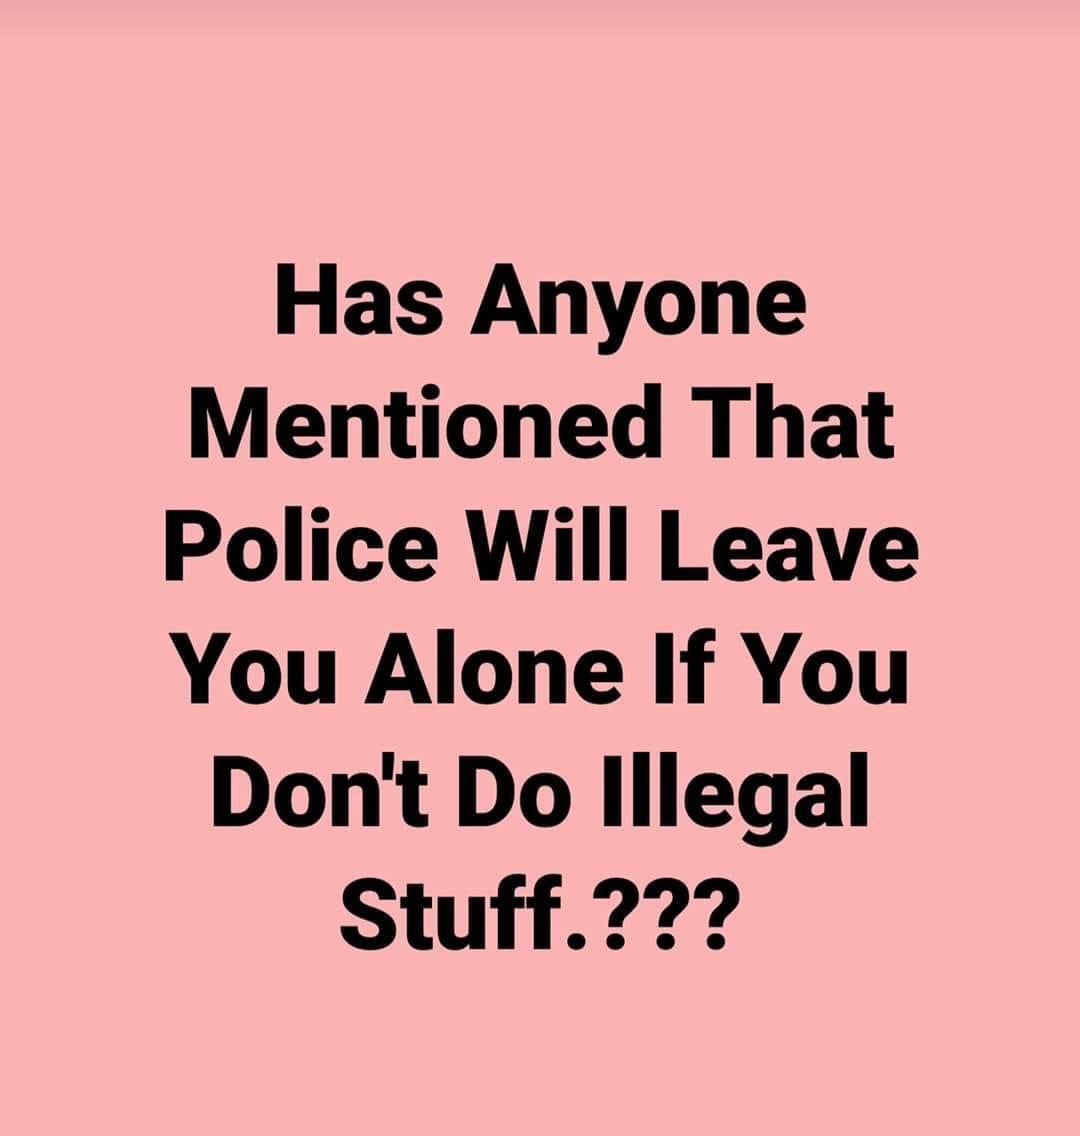 Political, Officers, March, October, April, Corey Jones boomer memes Political, Officers, March, October, April, Corey Jones text: Has Anyone Mentioned That Police Will Leave You Alone If You Don't Do Illegal Stuff.??? 